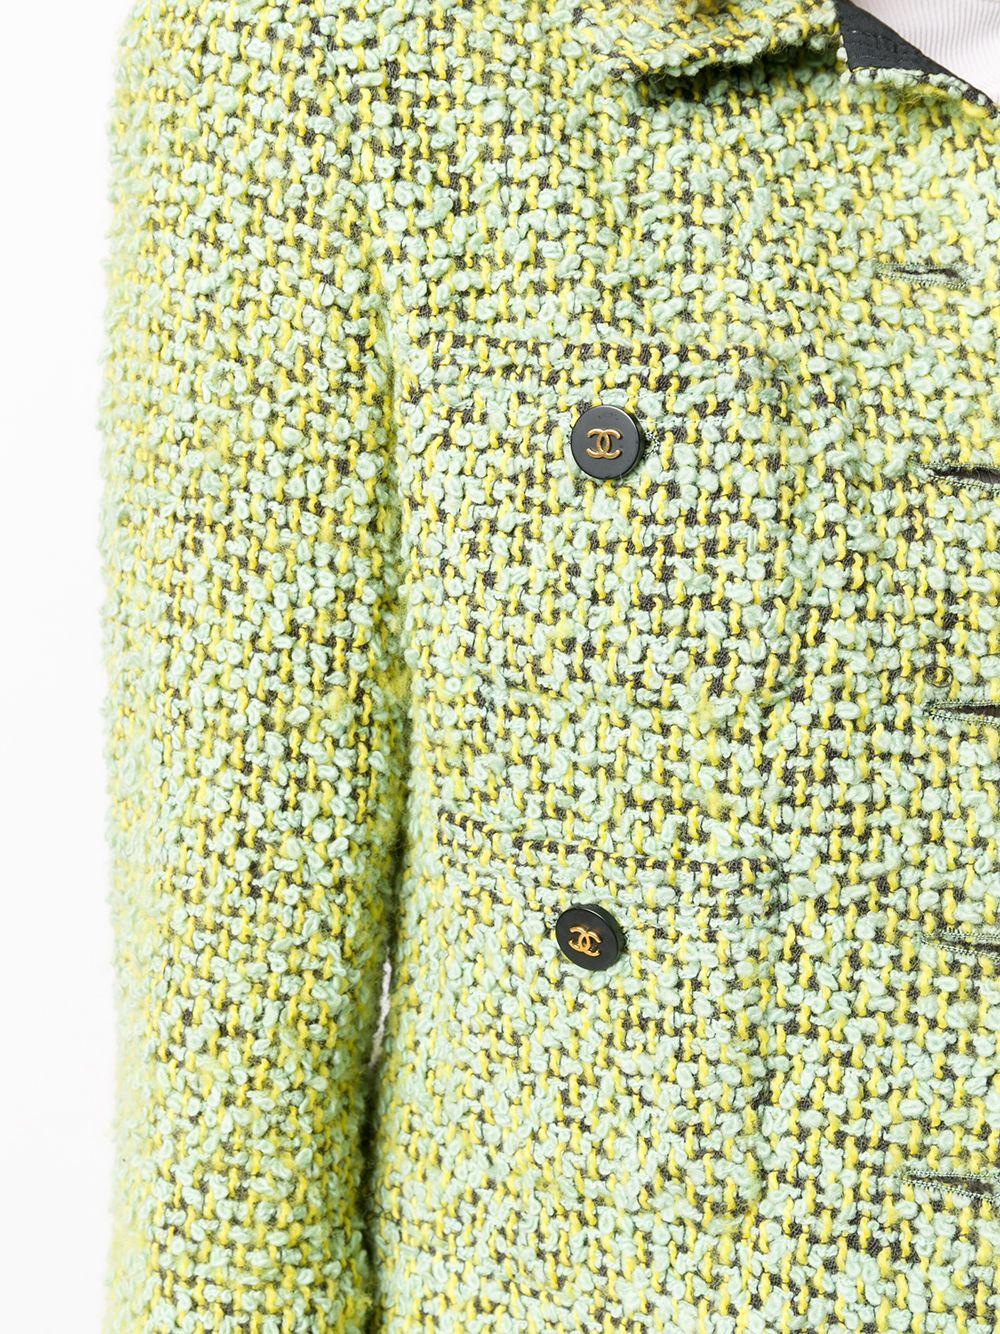 Expertly cut and crafted in France from pure tweed in a springtime palette of mint, lime and black, this long-sleeved, bouclé jacket by Chanel boasts a classic collar, a straight hem and a distinctive, woven braid pattern throughout. For a unique